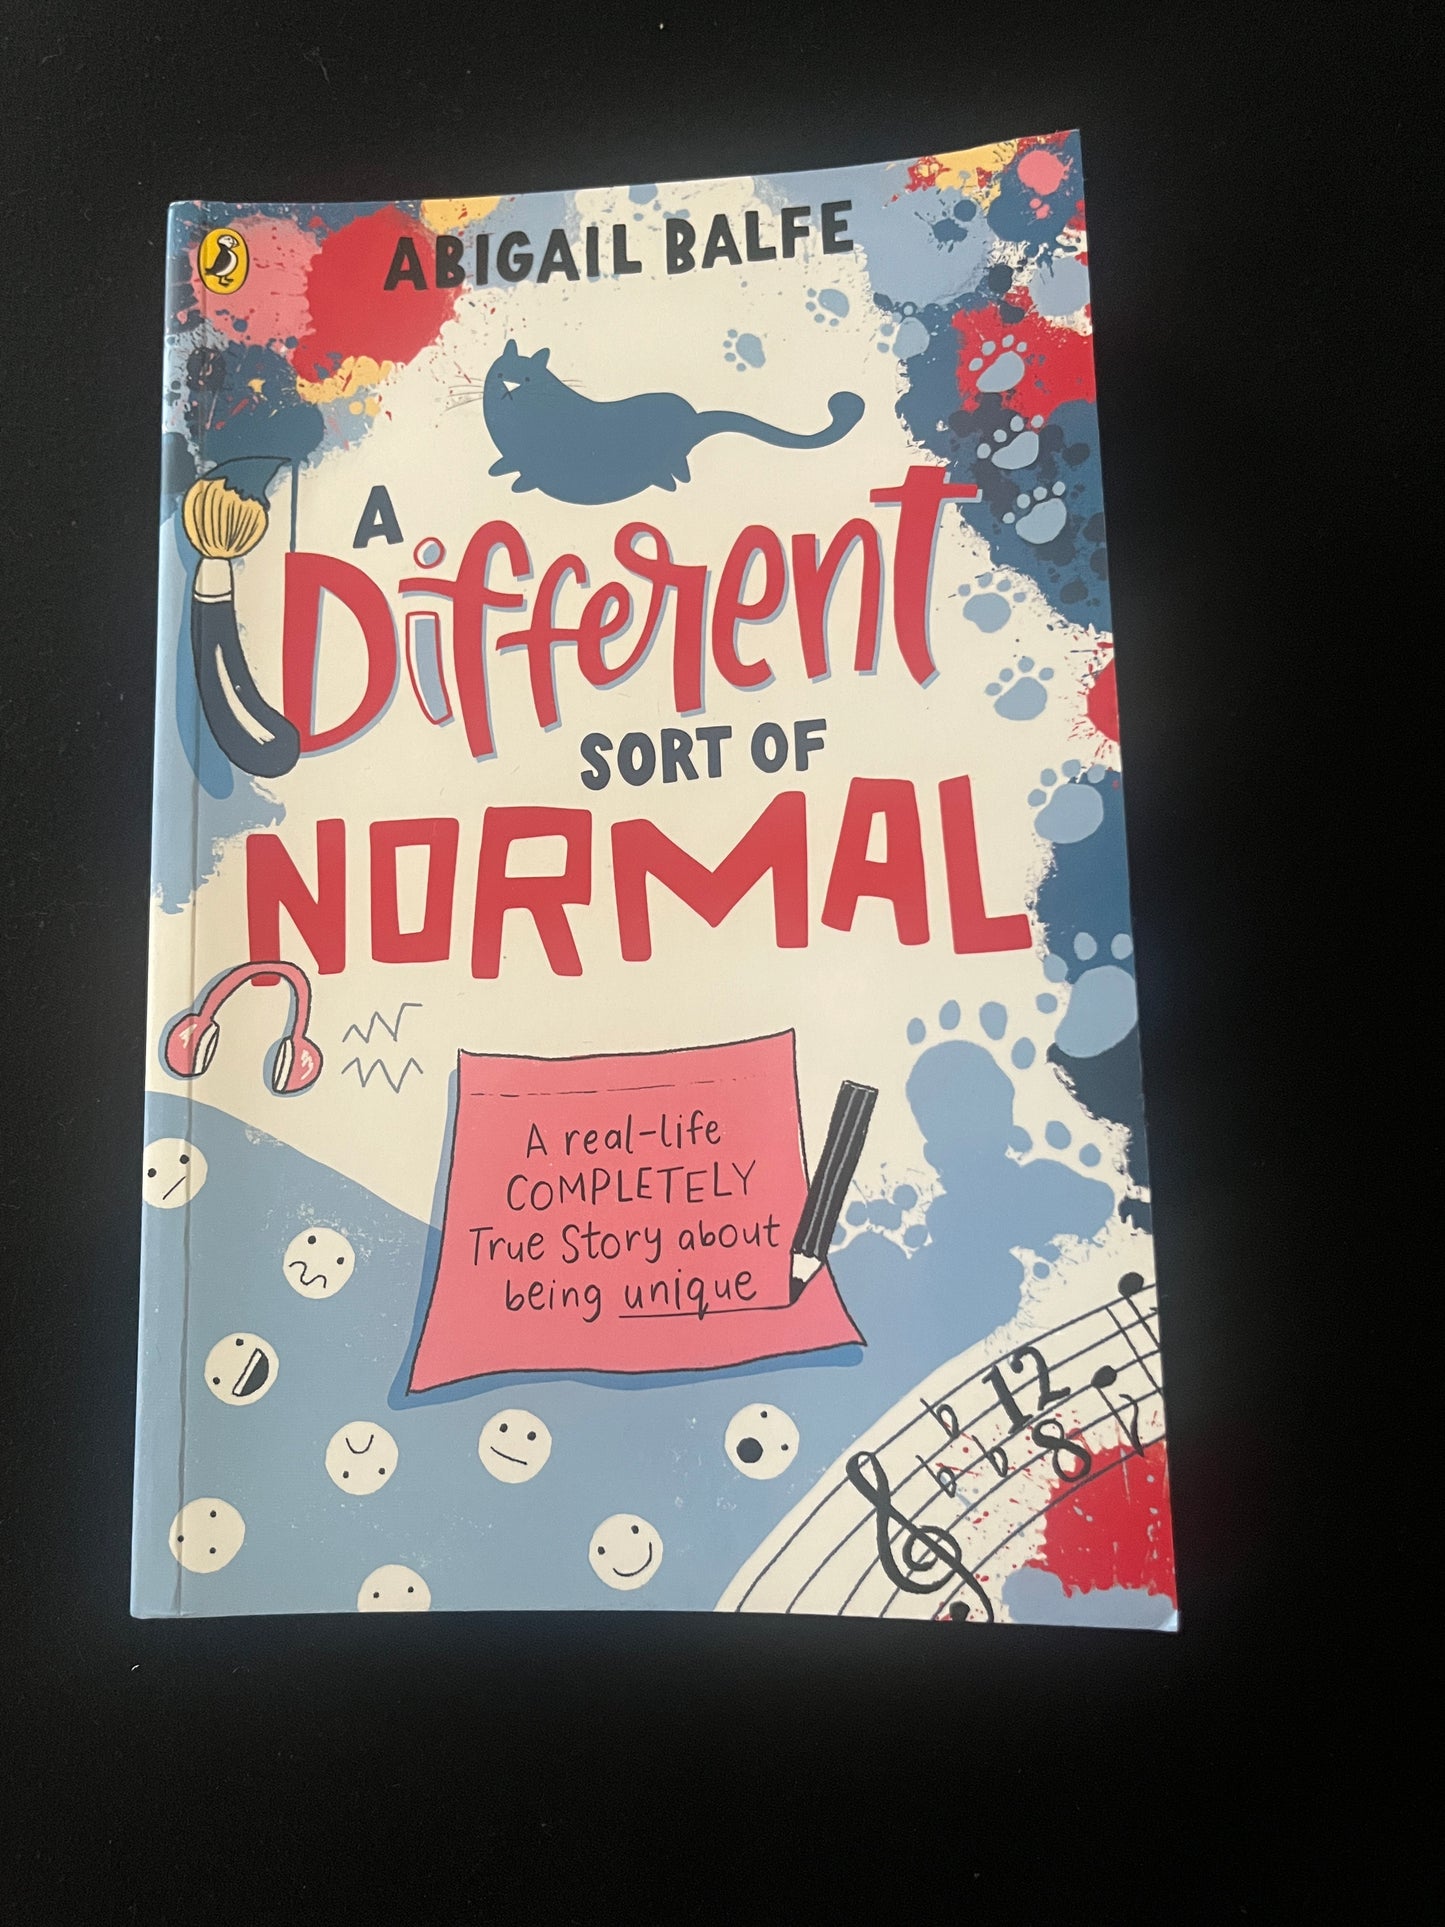 A DIFFERENT SORT OF NORMAL by Abigail Balfe